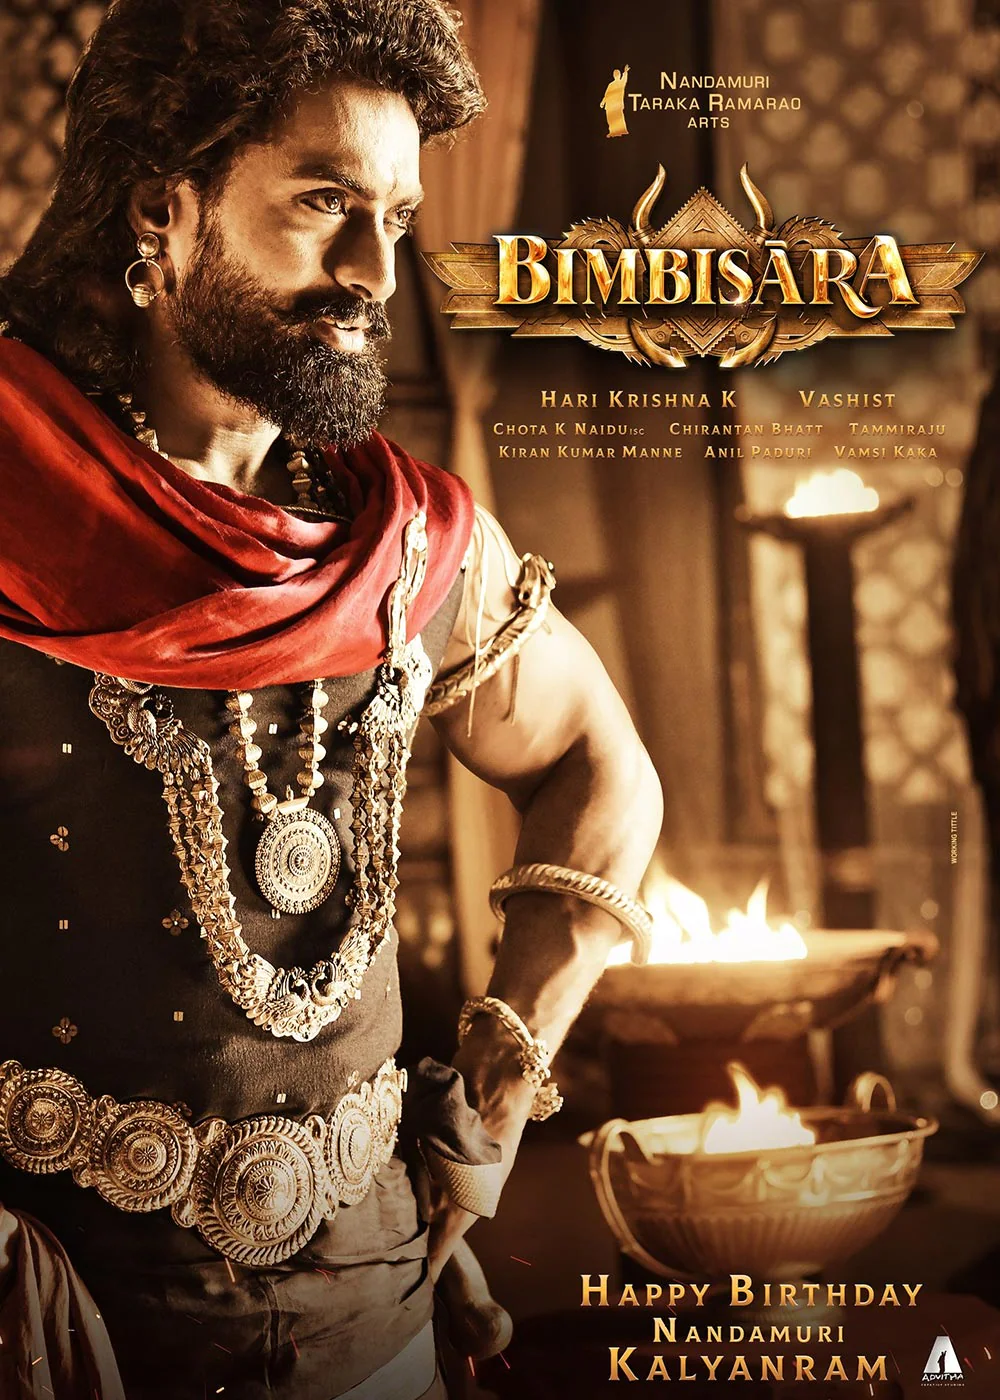 Bimbisara Movie 2022, Official Trailer, Release Date, HD Poster